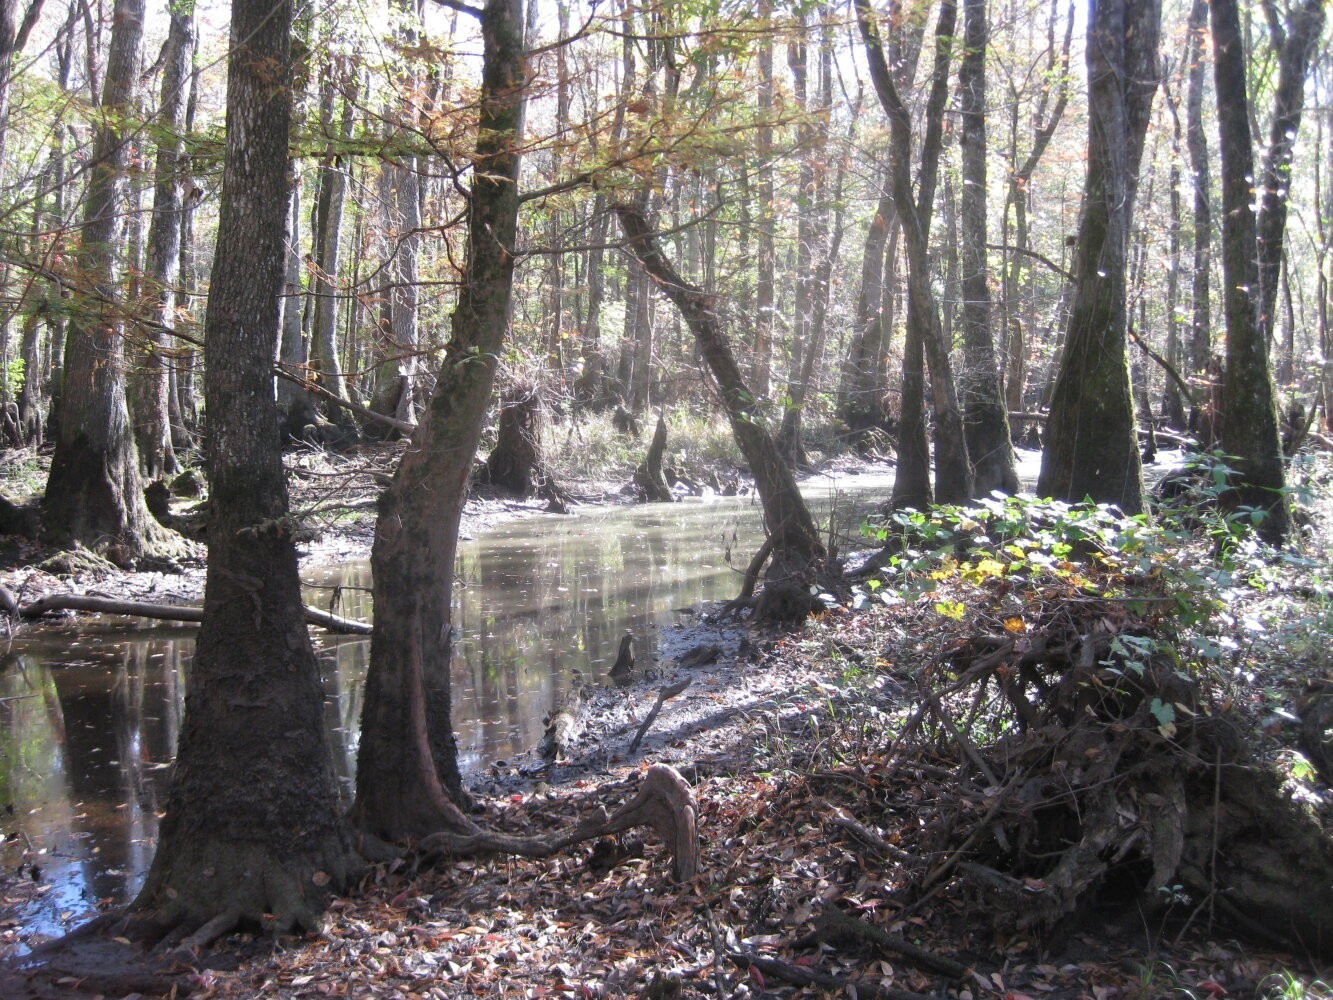 2. Fronting I-95 And Little Pee Dee River